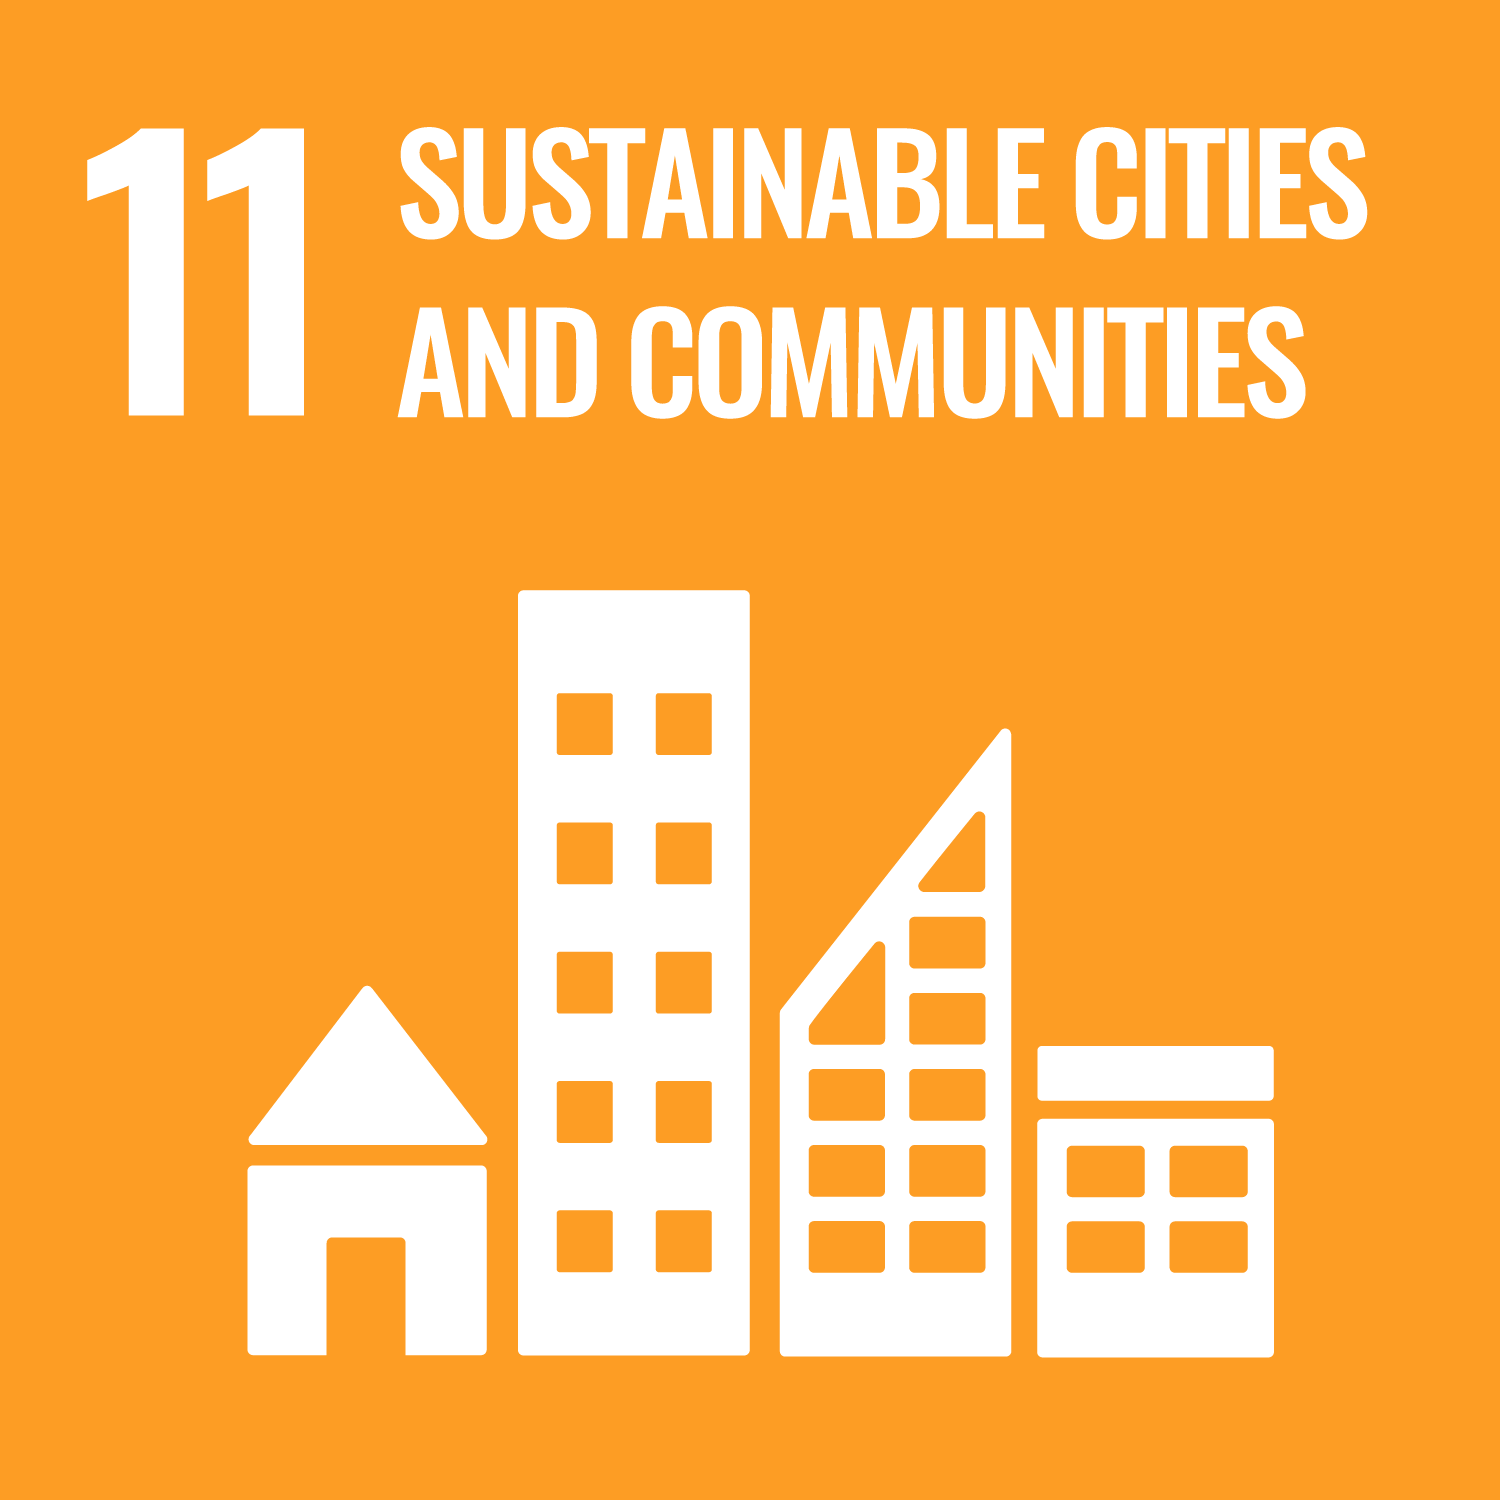 United Nation's 17 Sustainable Development Goals: Goal Number 11: Sustainable Cities and Communities